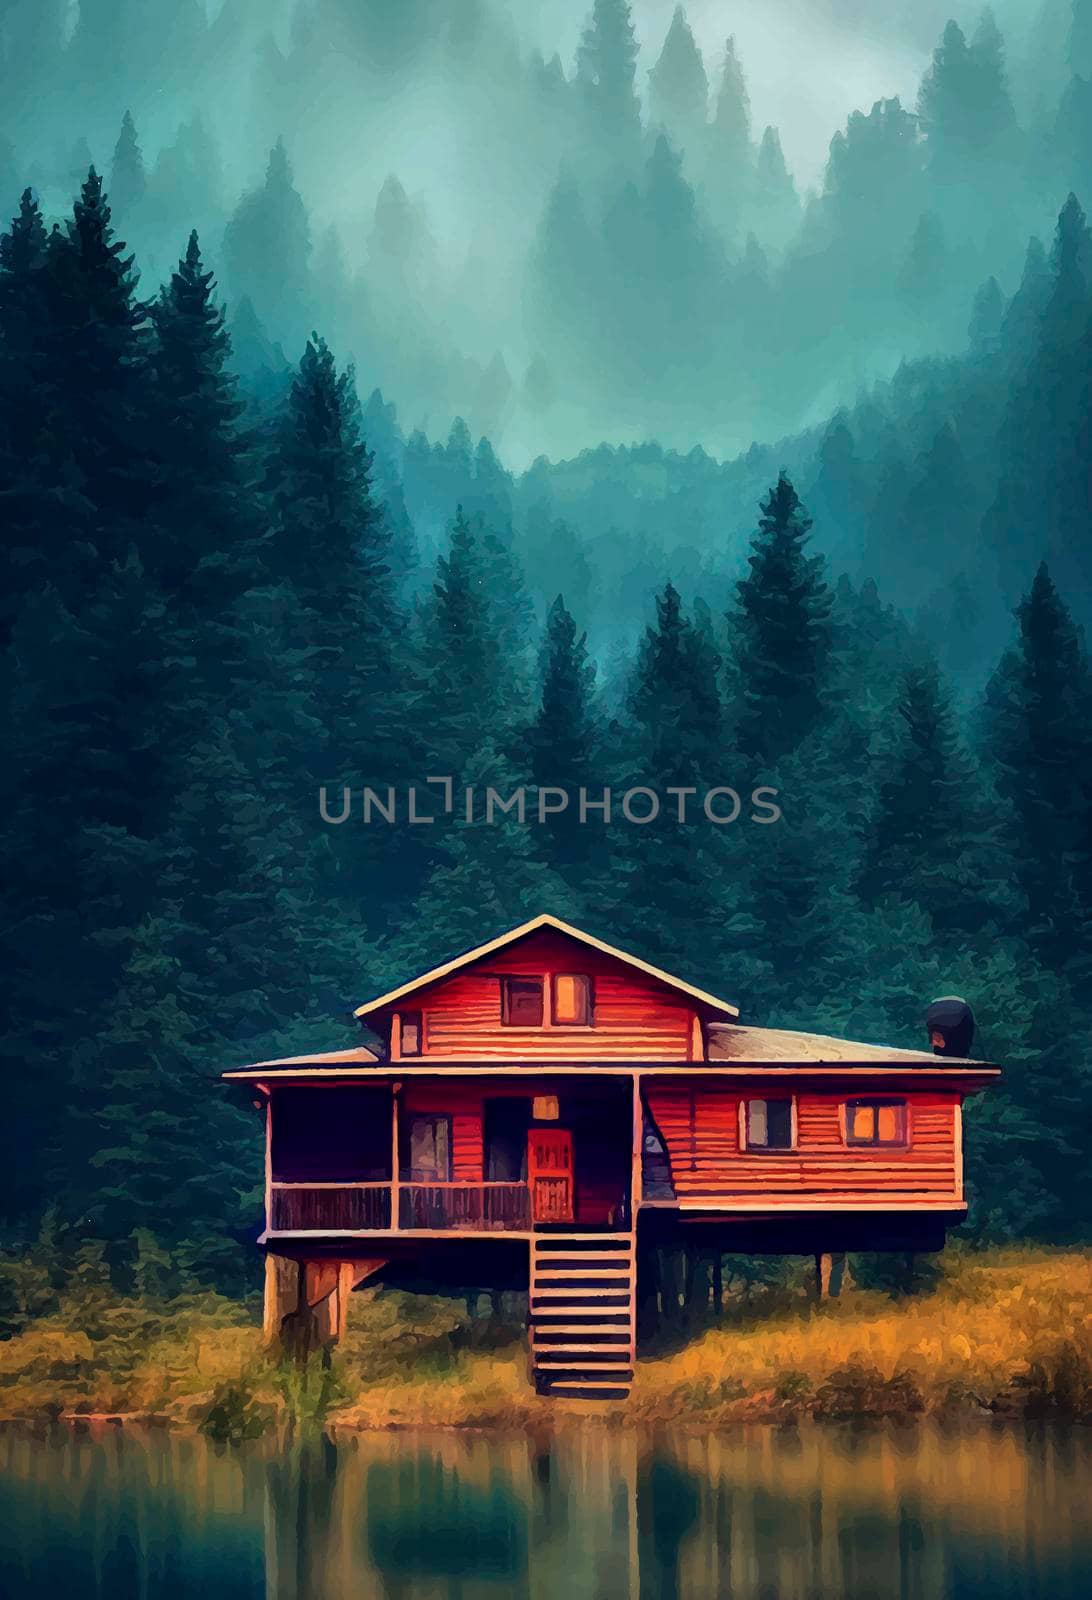 illustration of lakeside cabin in the forest, with pine trees in the background by JpRamos